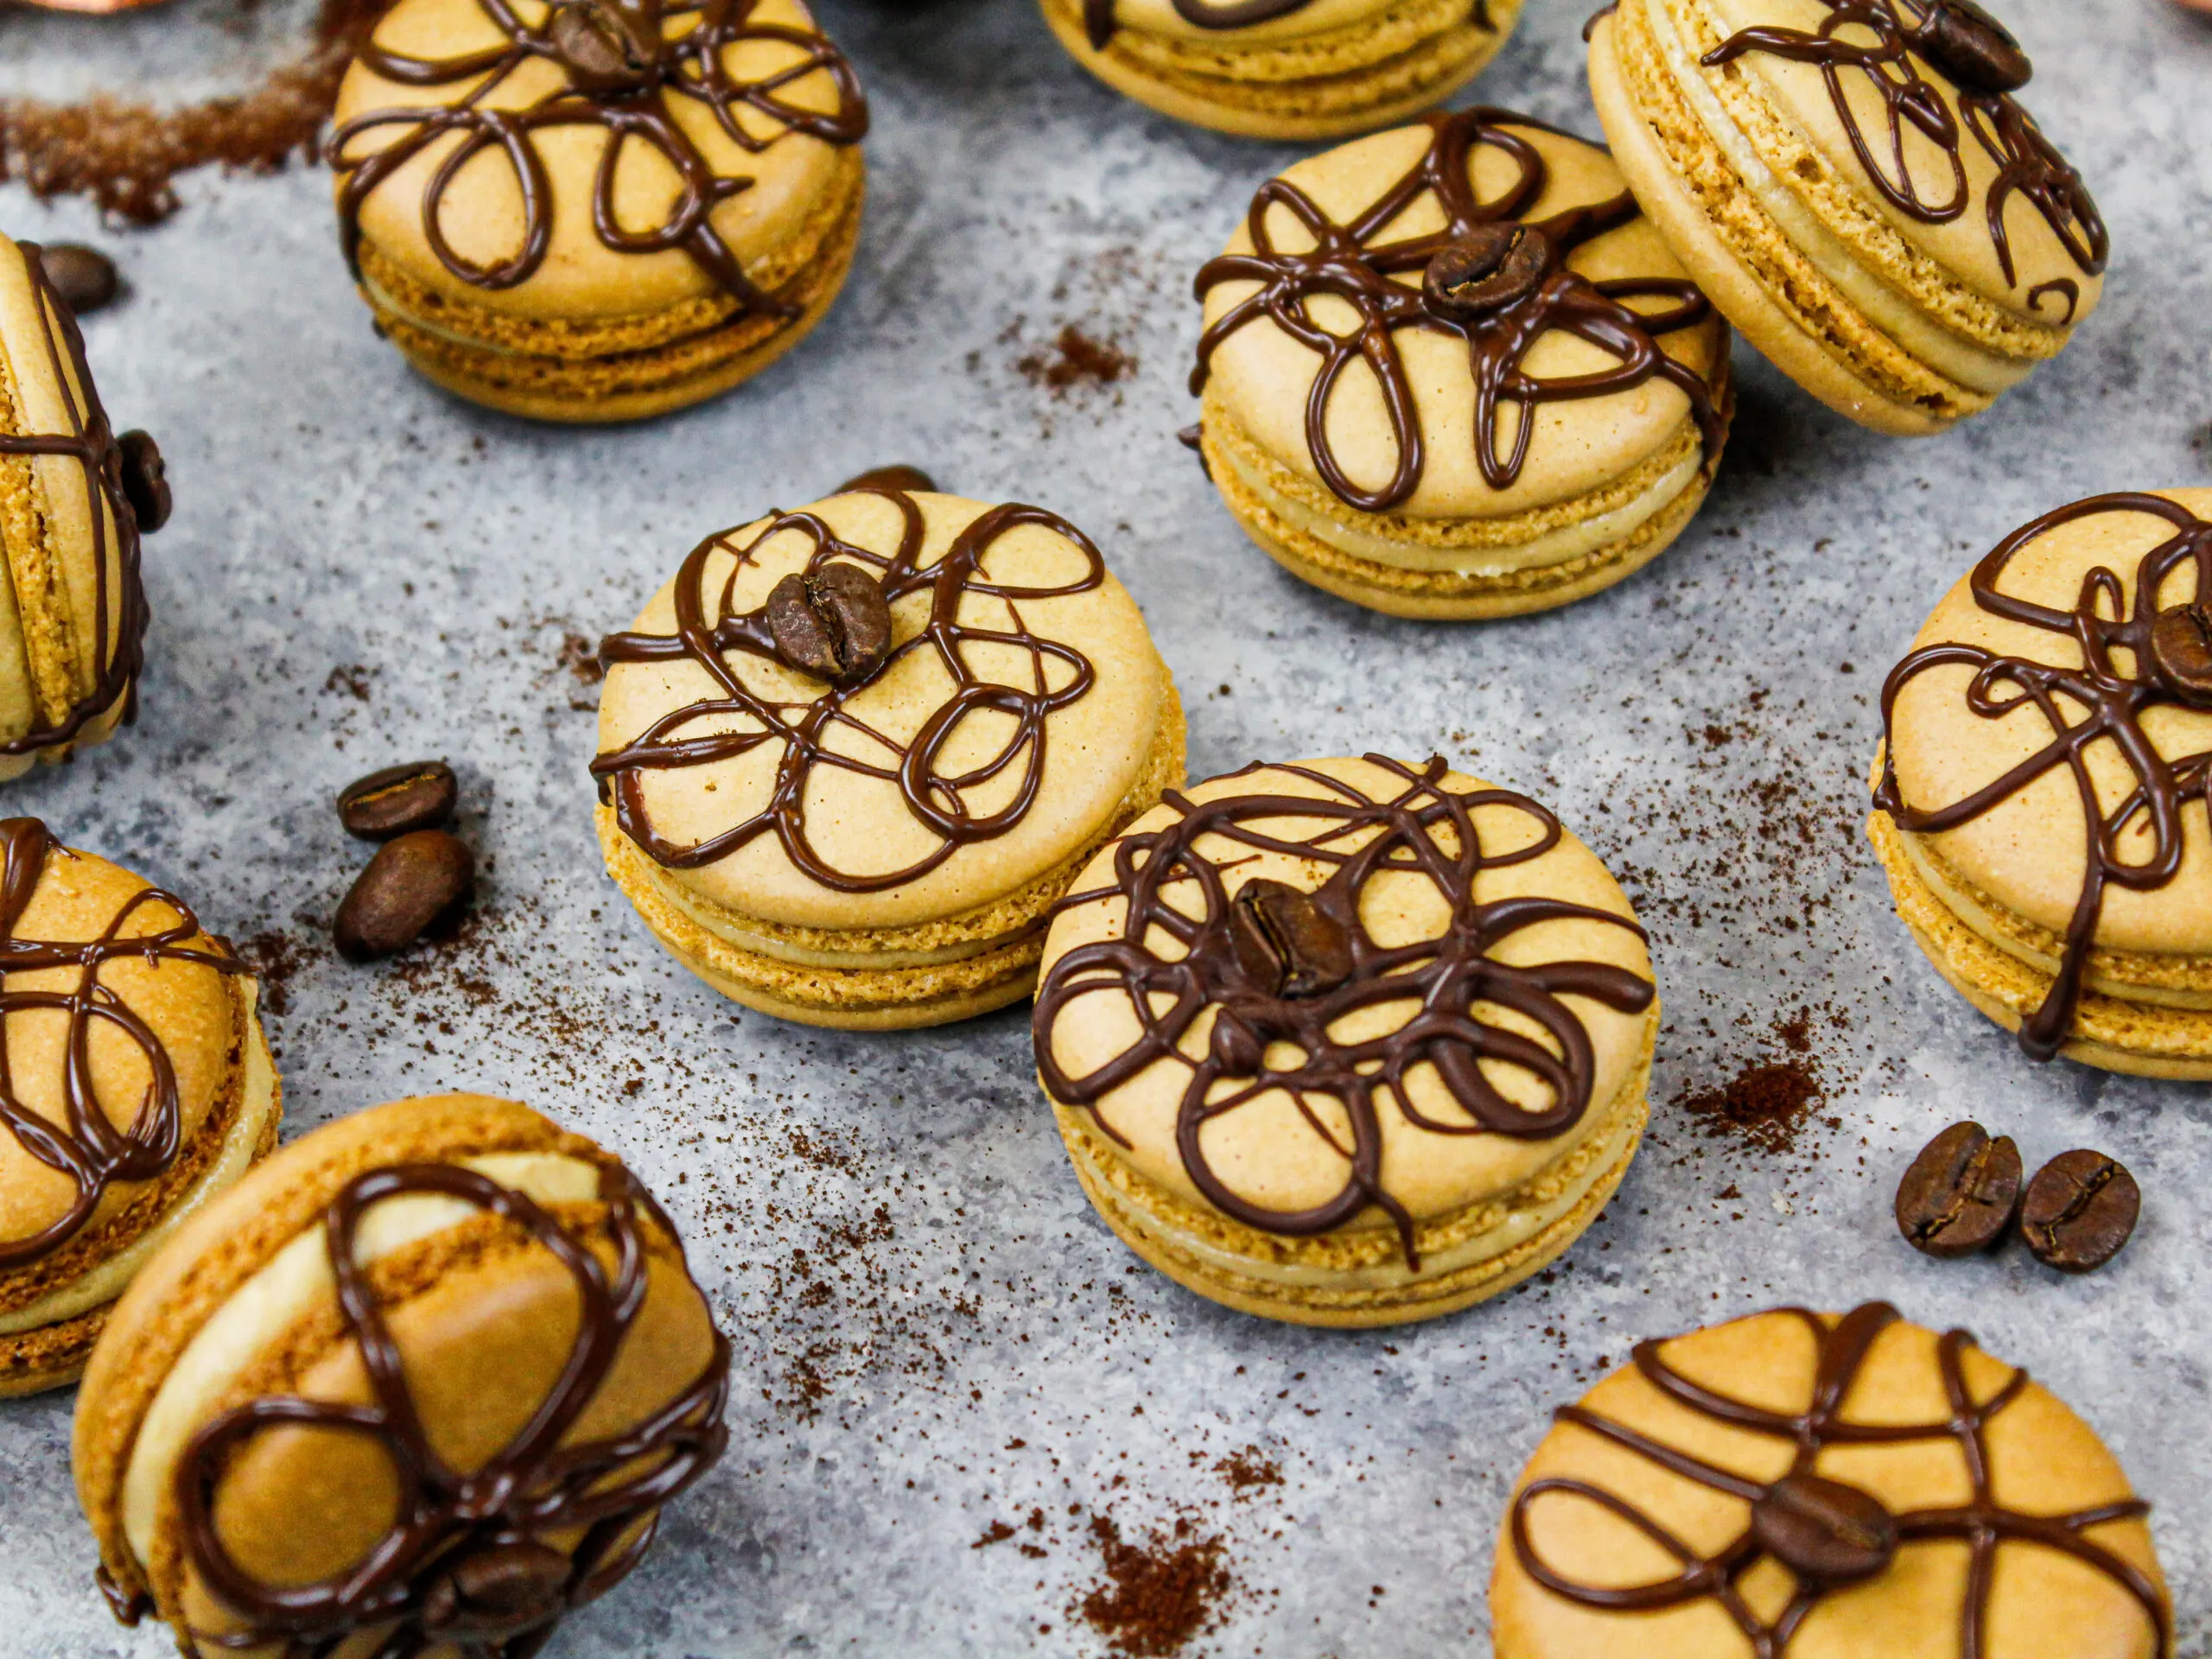 image of coffee macarons filled with coffee buttercream and decorated with a drizzle of dark chocolate and a coffee bean